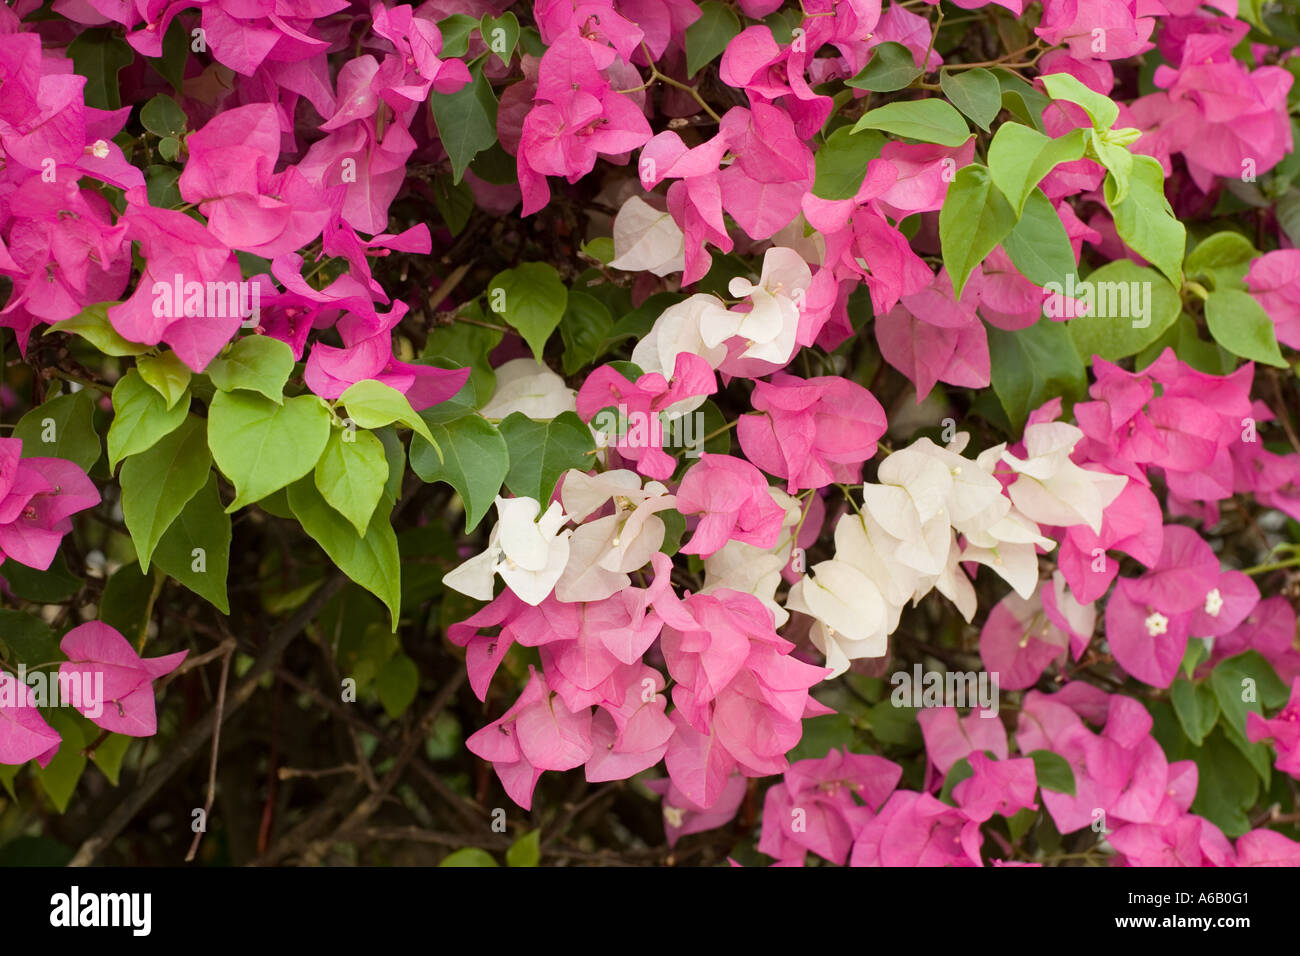 Purple and white flowers of the South American woody shrub Bougainvillaea now a common garden plant in Kenya Stock Photo